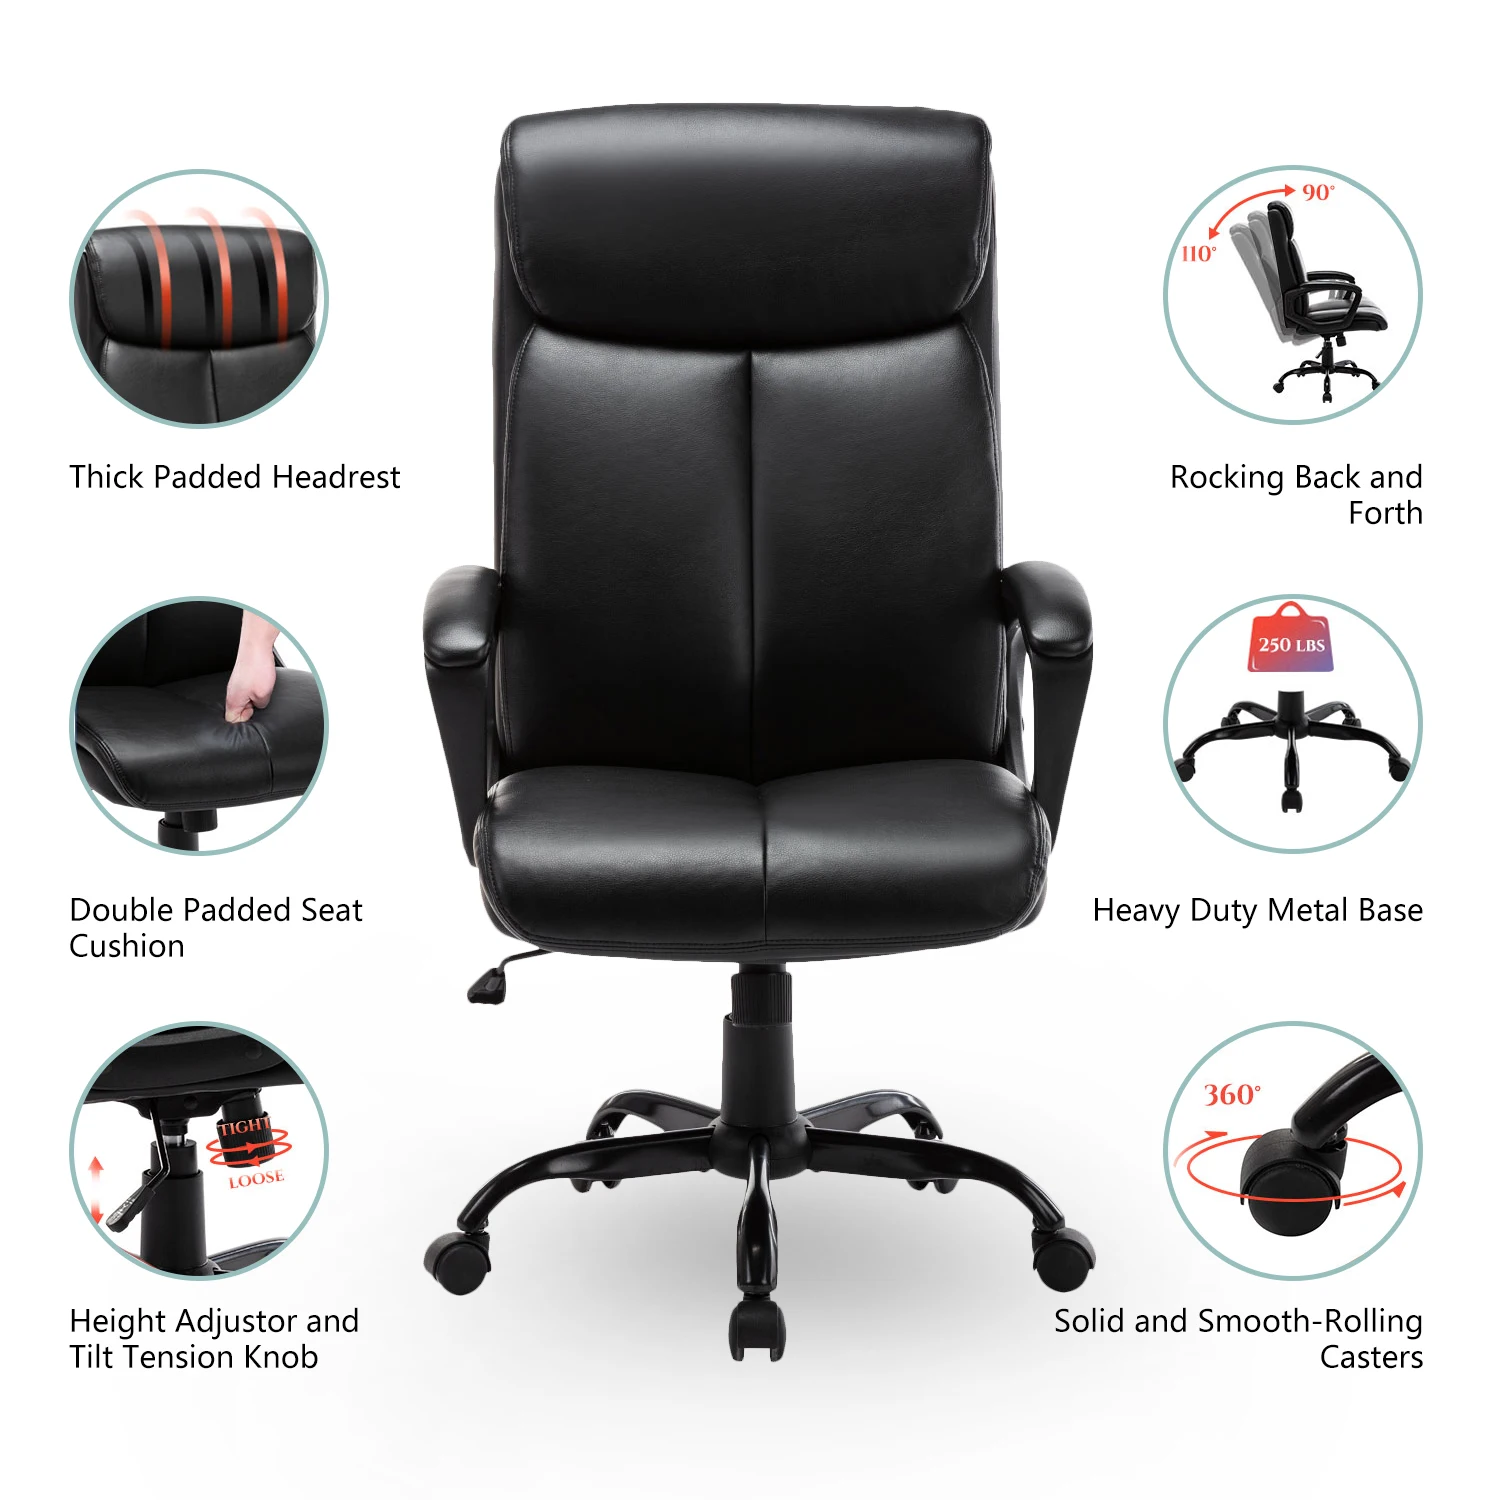 High Back Office Chair Executive Bonded Leather Computer Desk Swivel Task Chair W/Rocking Function Black[US-W]